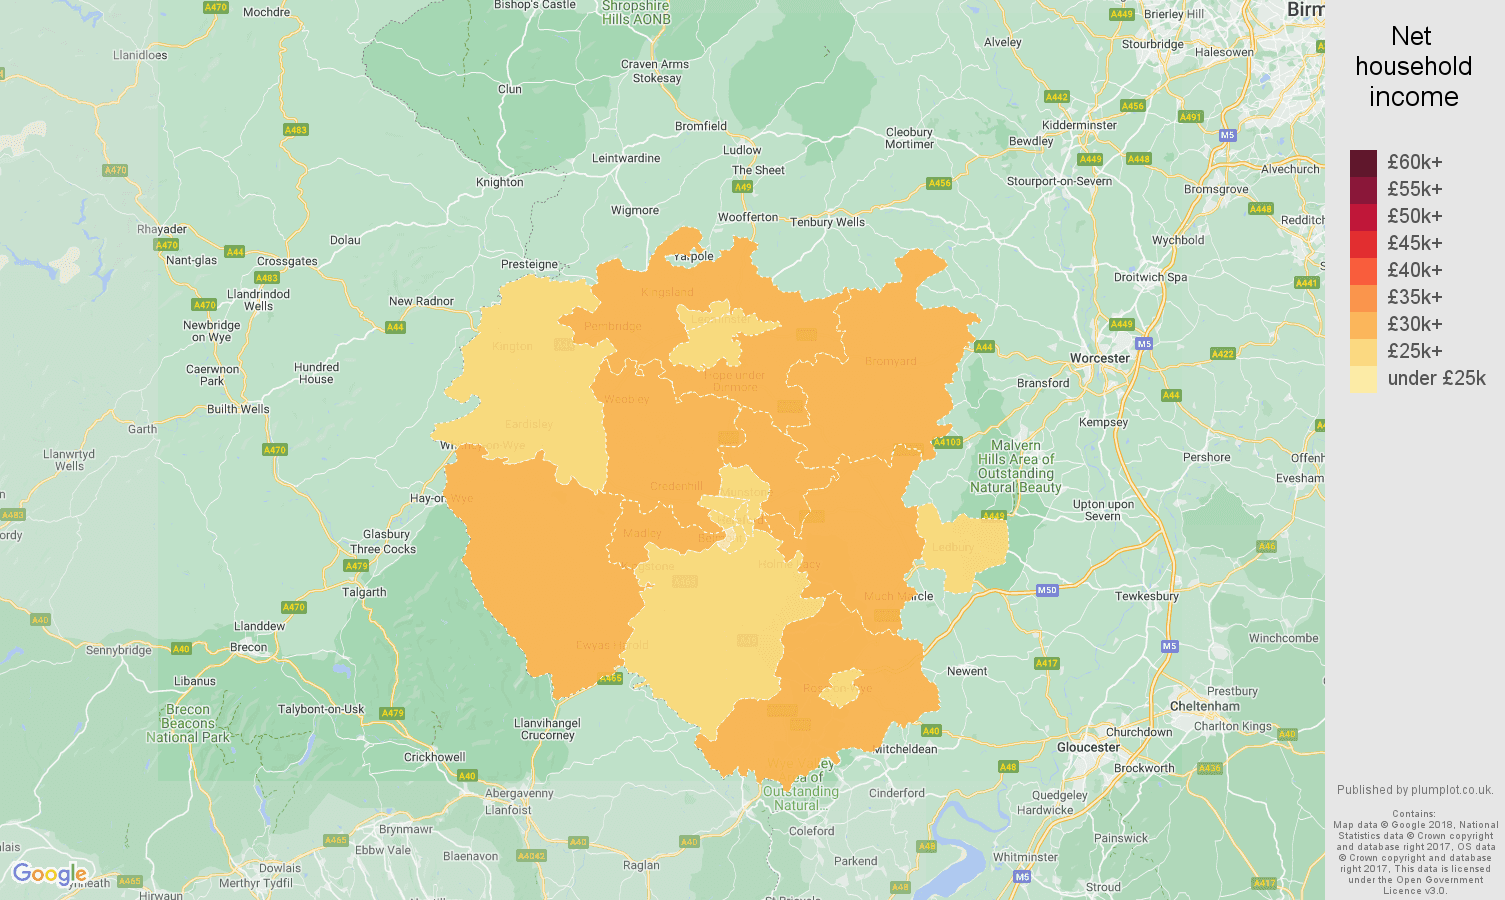 Hereford net household income map